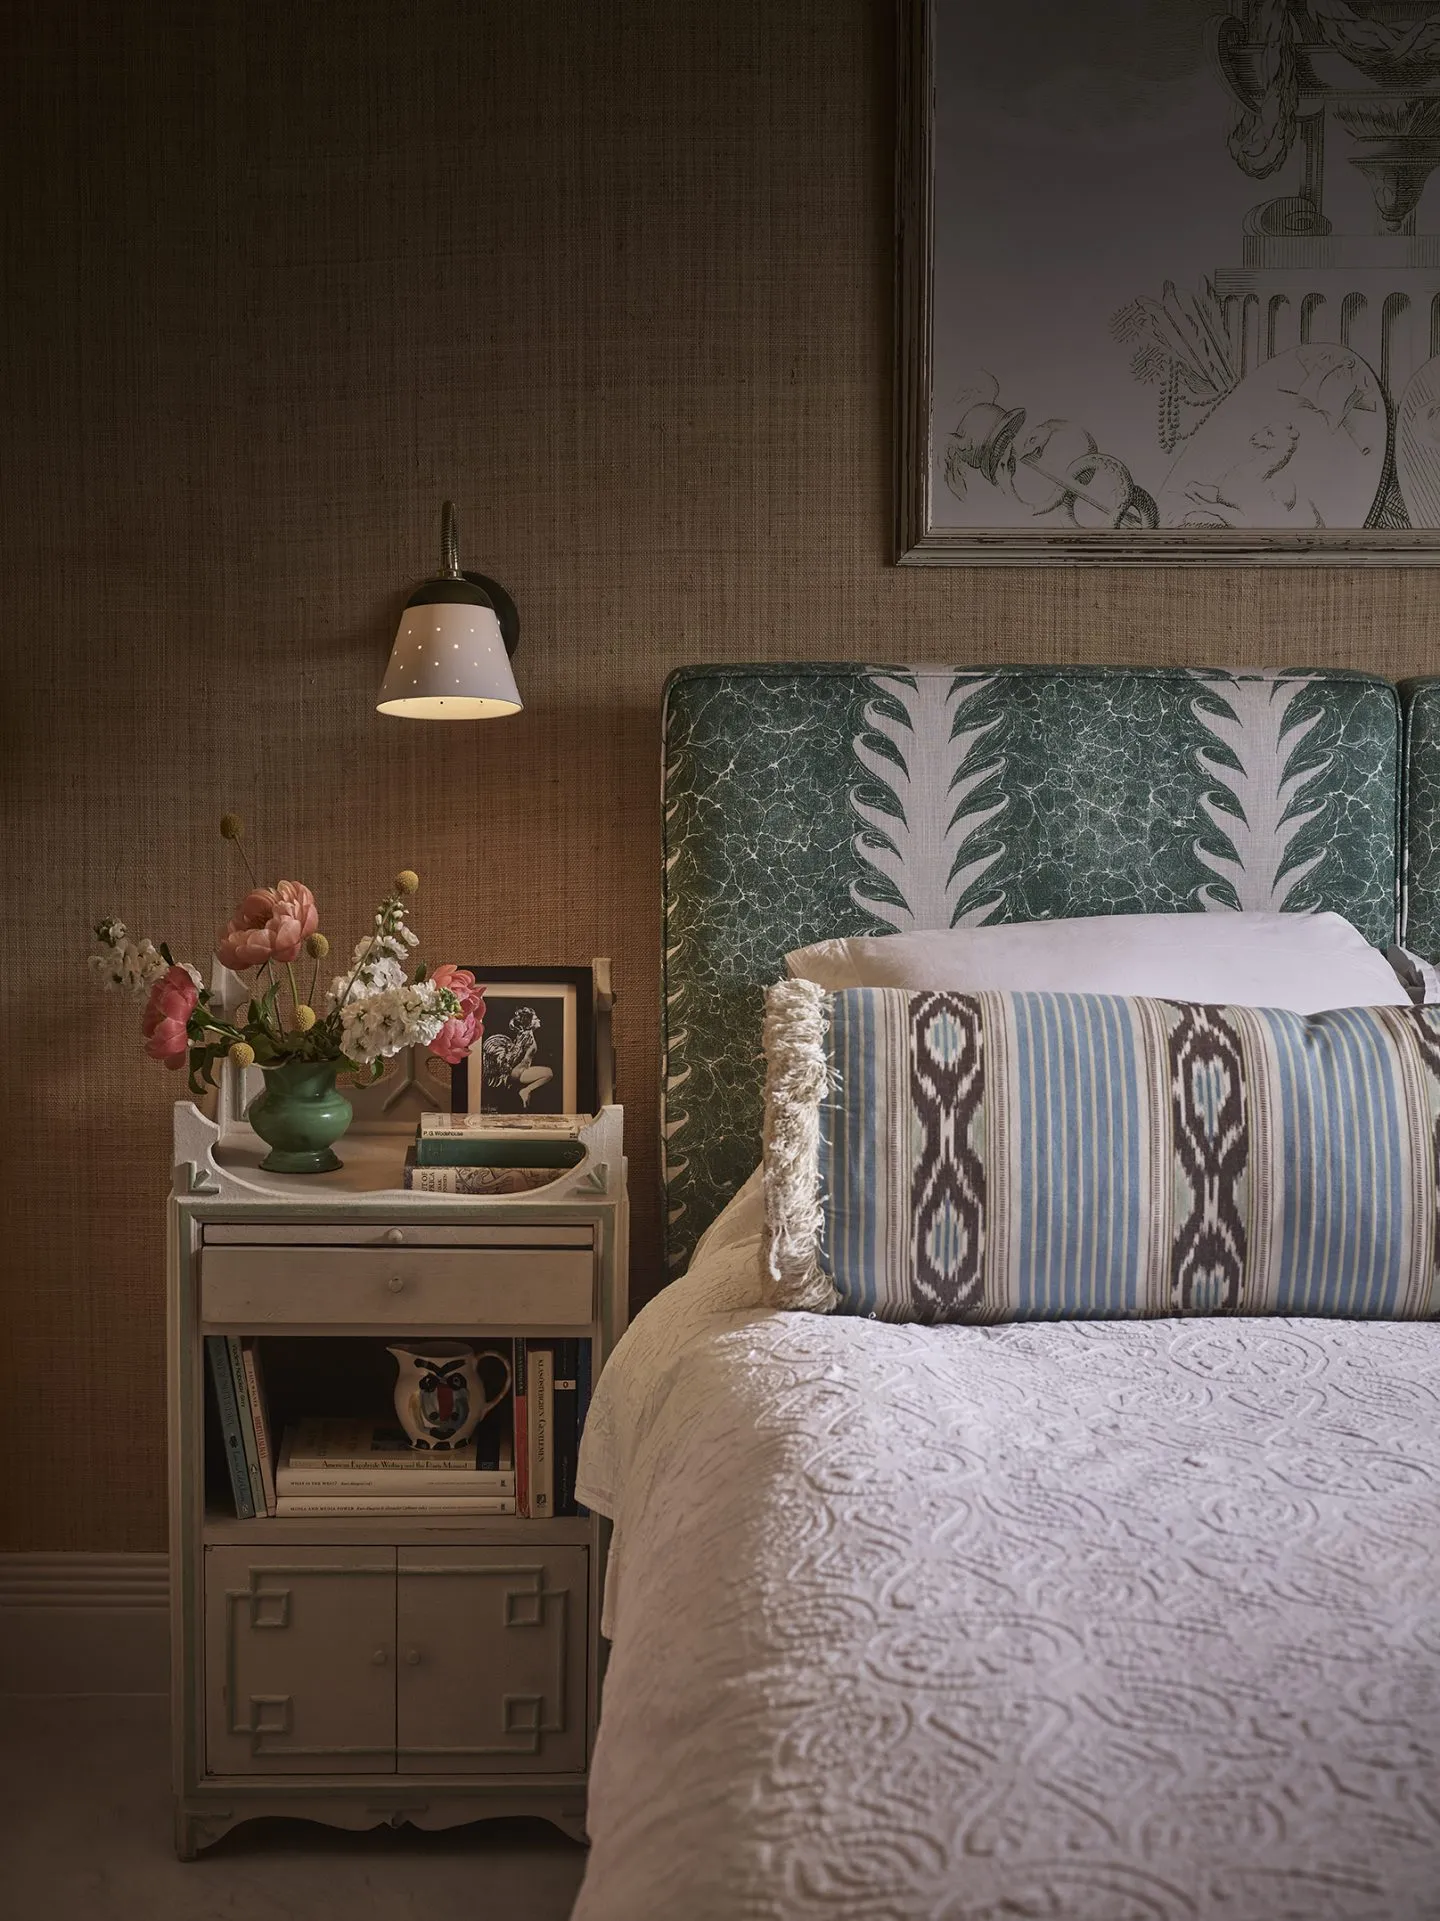 A cosy bedroom design with lots of pattern and texture